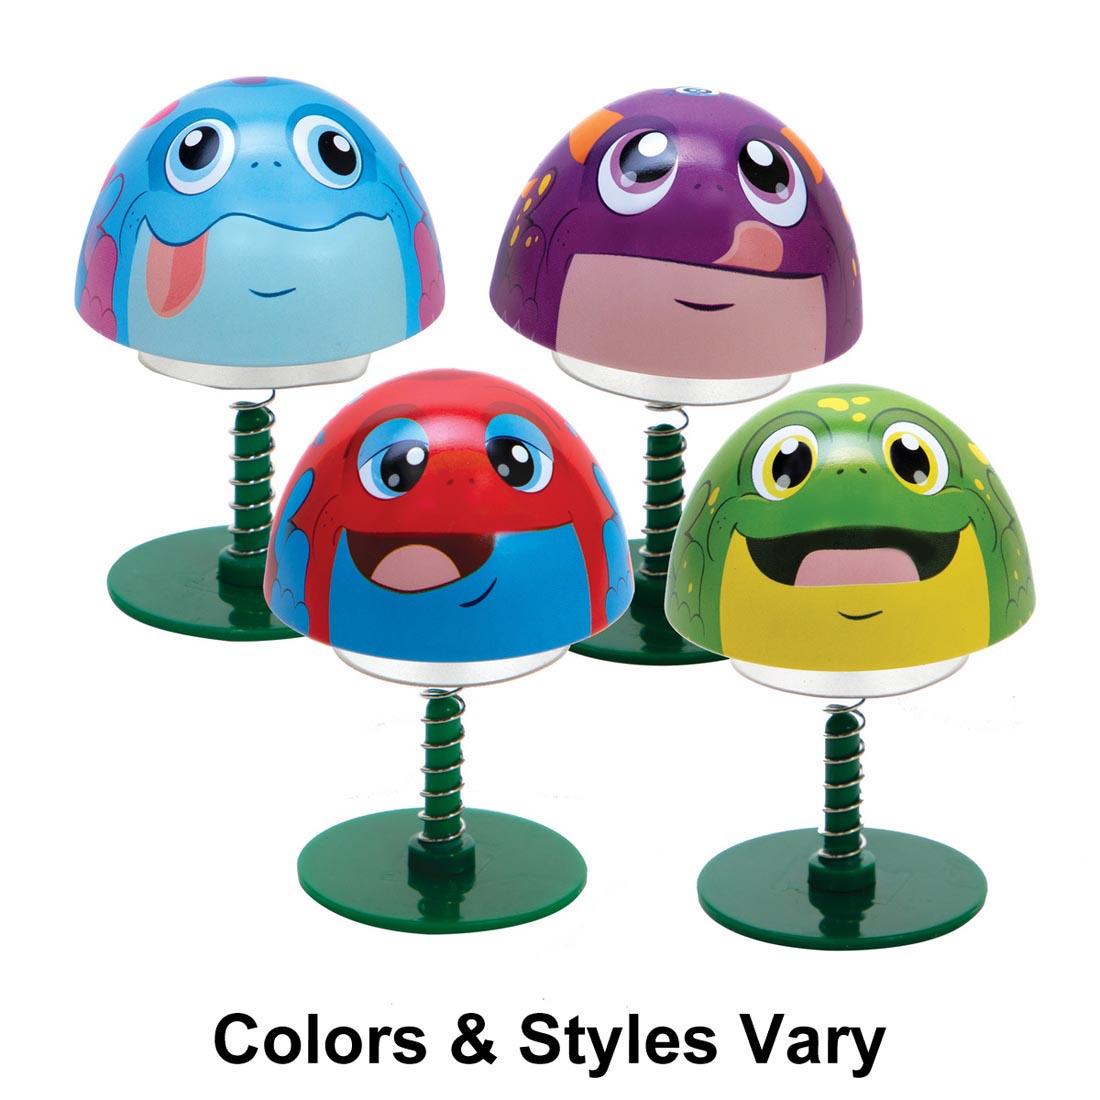 Four Frog Popper Toys with the text Colors & Styles Vary